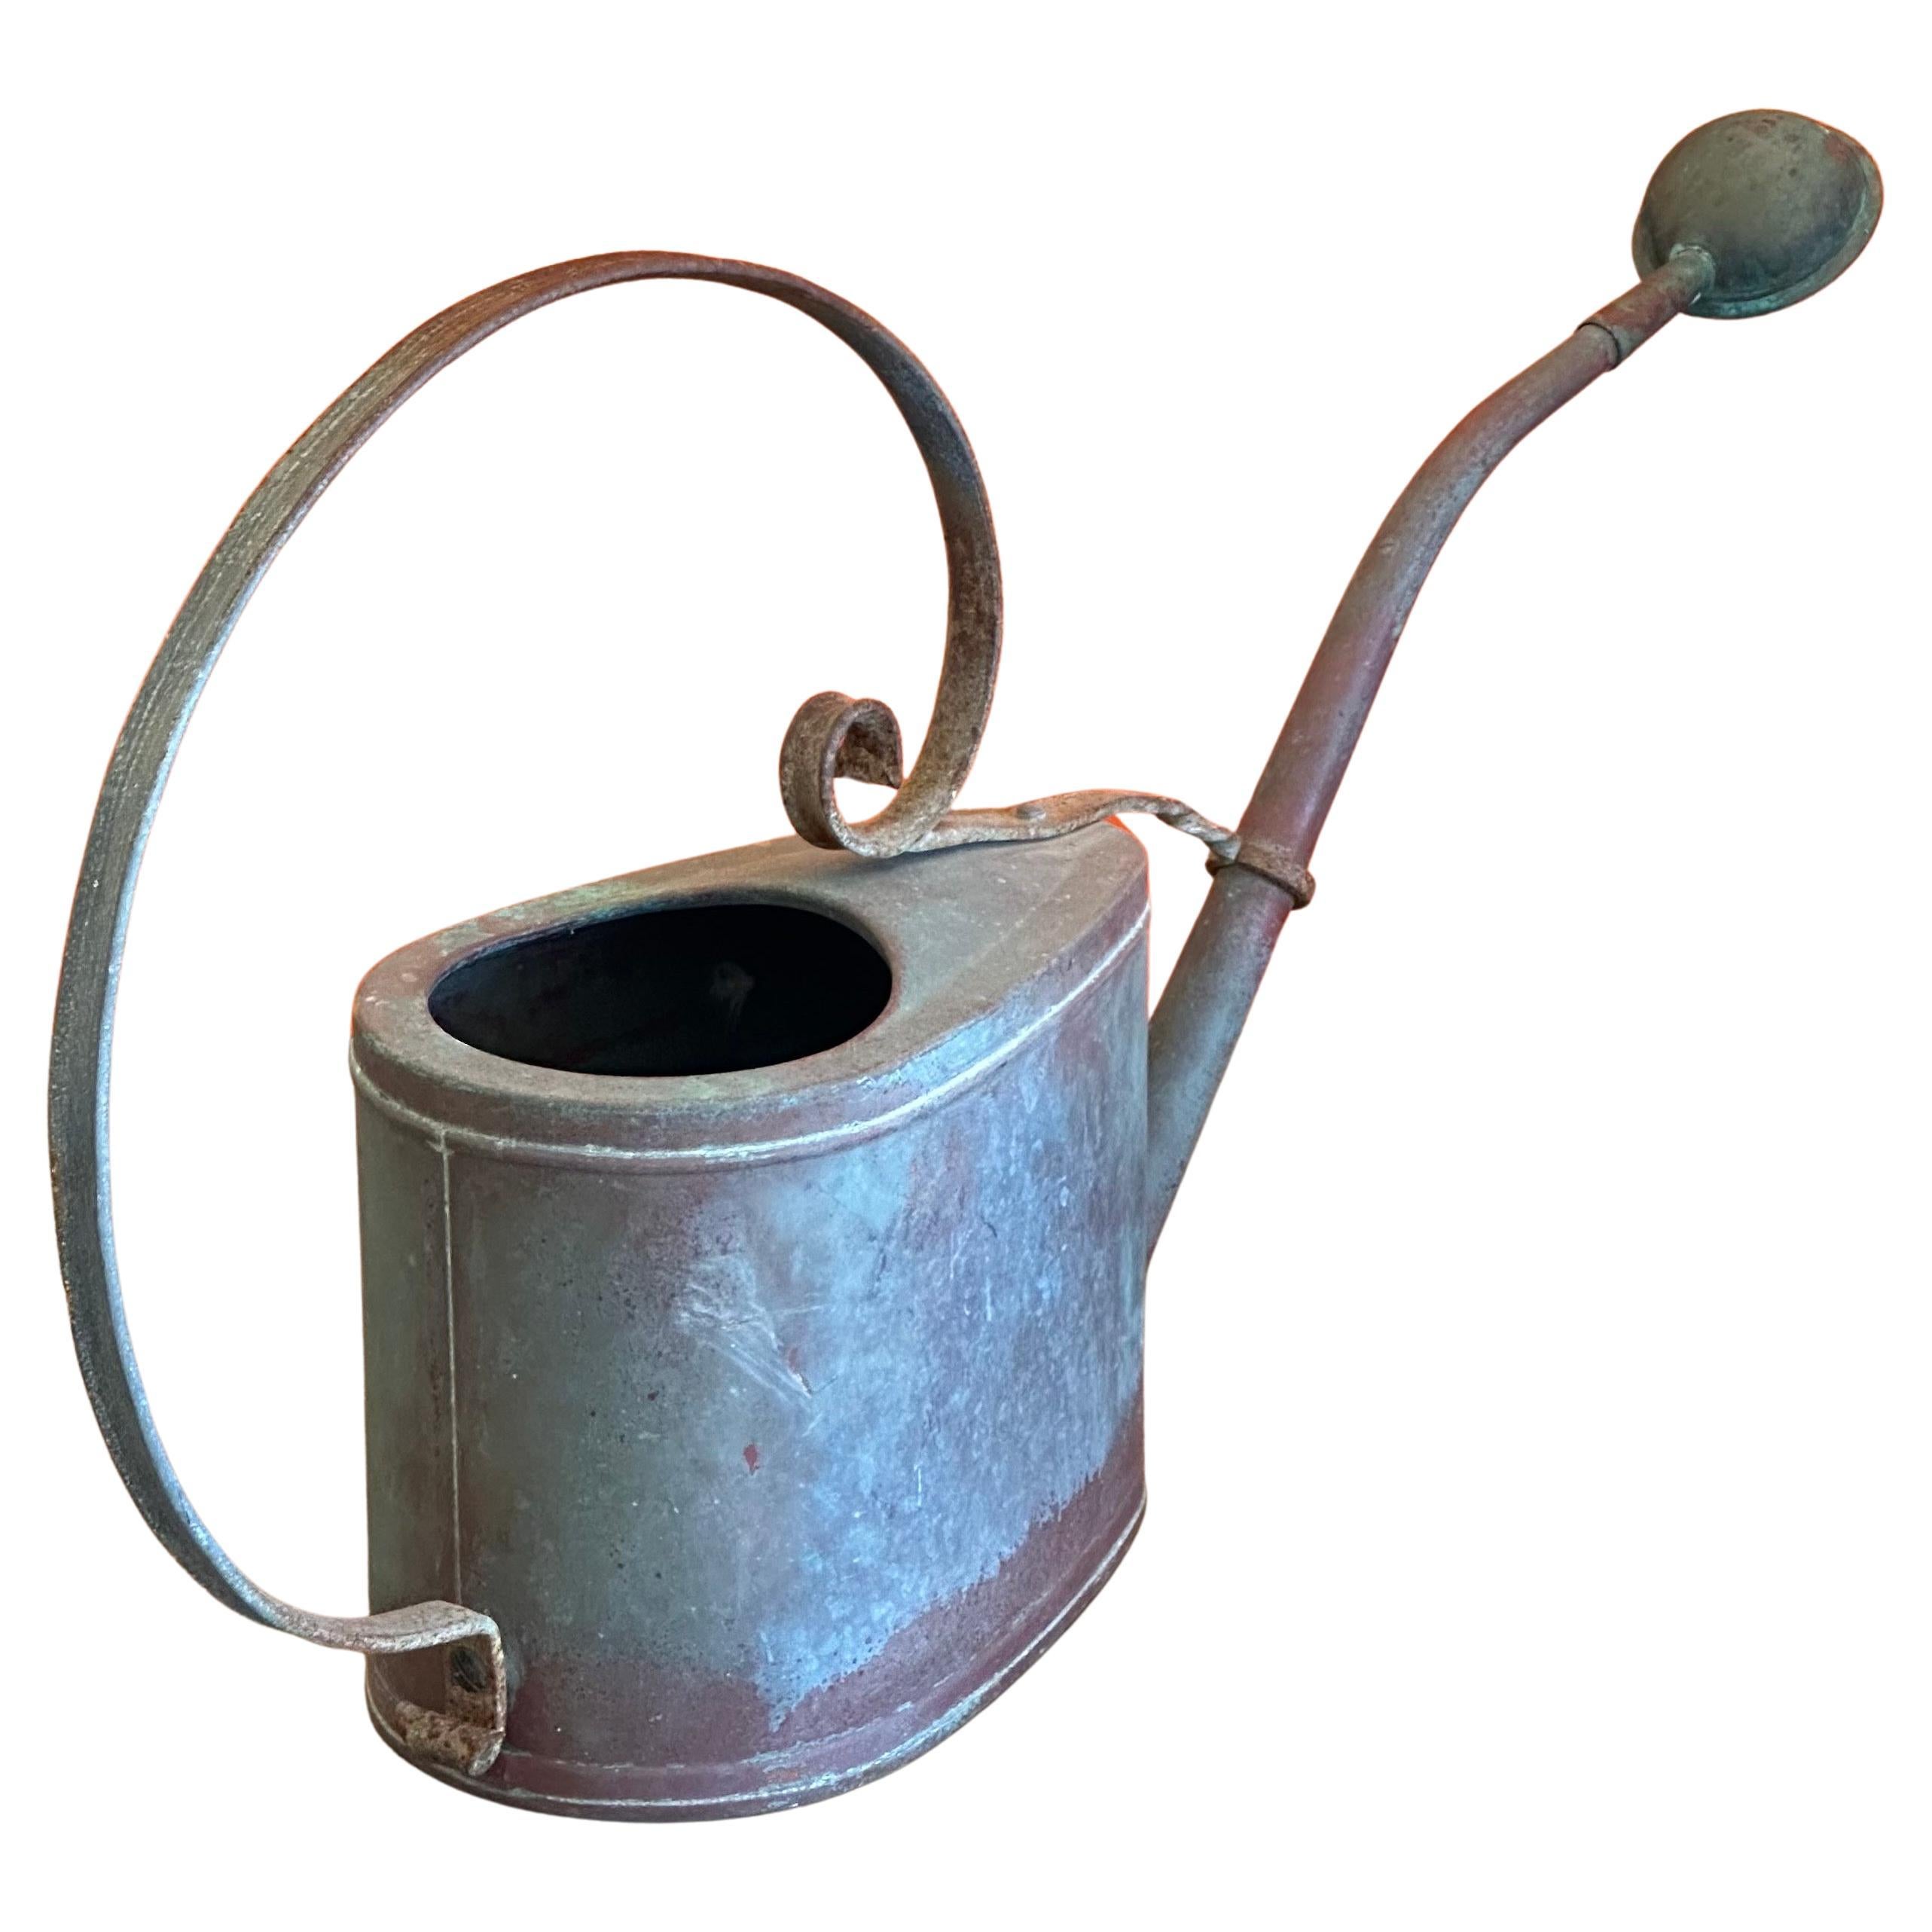 A charming mid-century copper watering can, circa 1970s. The can is in good vintage condition with a removeable spout and measures 4.5